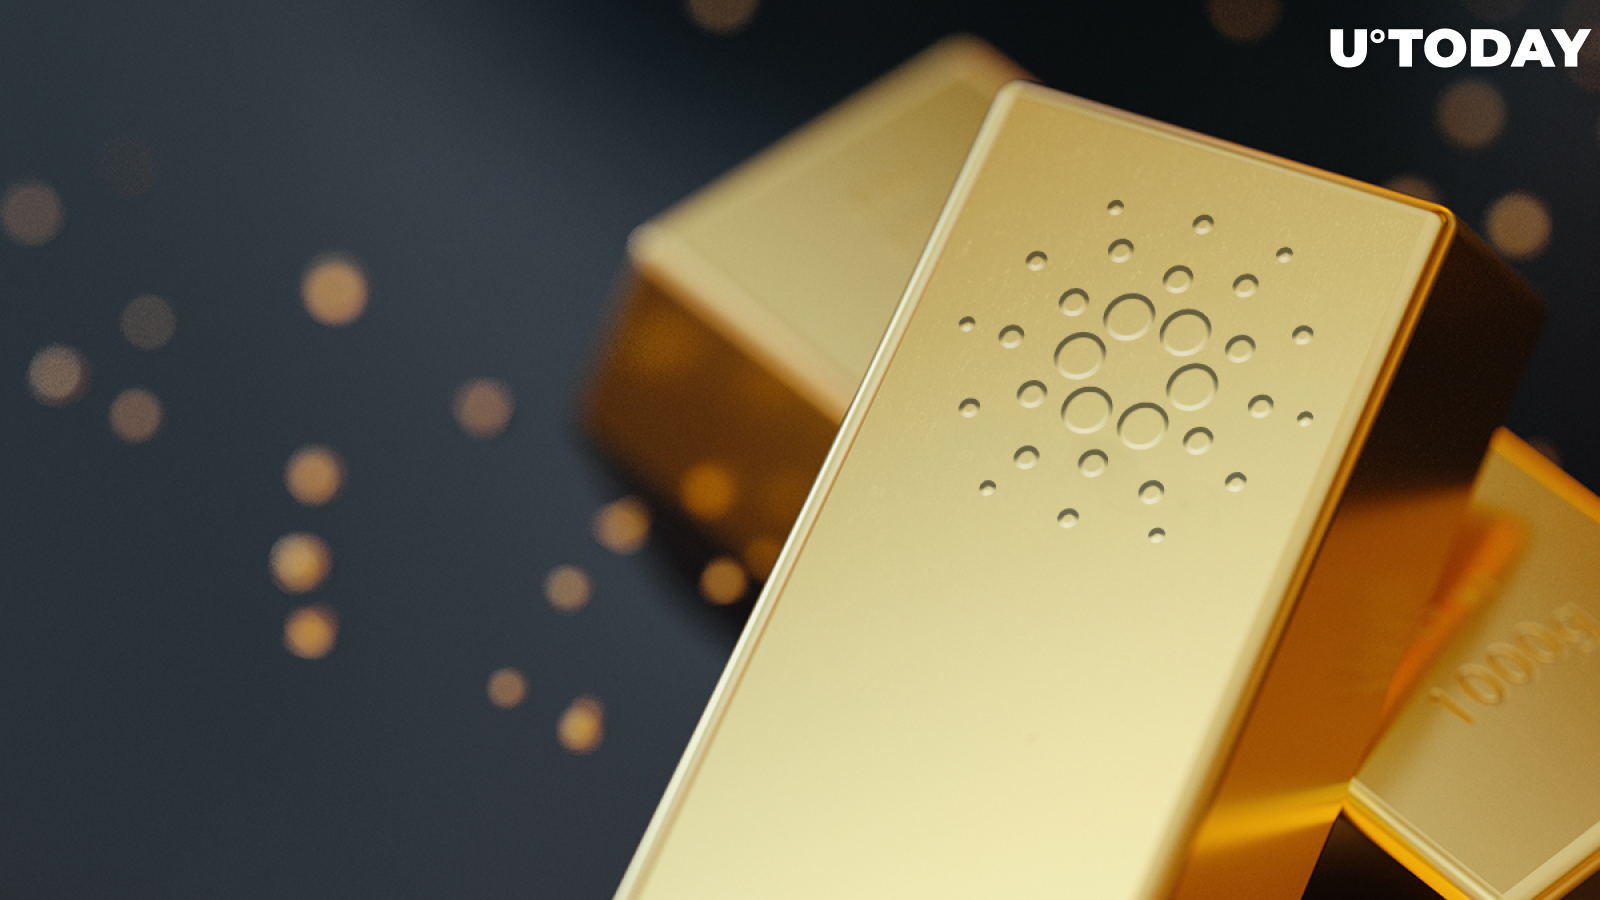 Cardano to Have Gold-Backed Stablecoin